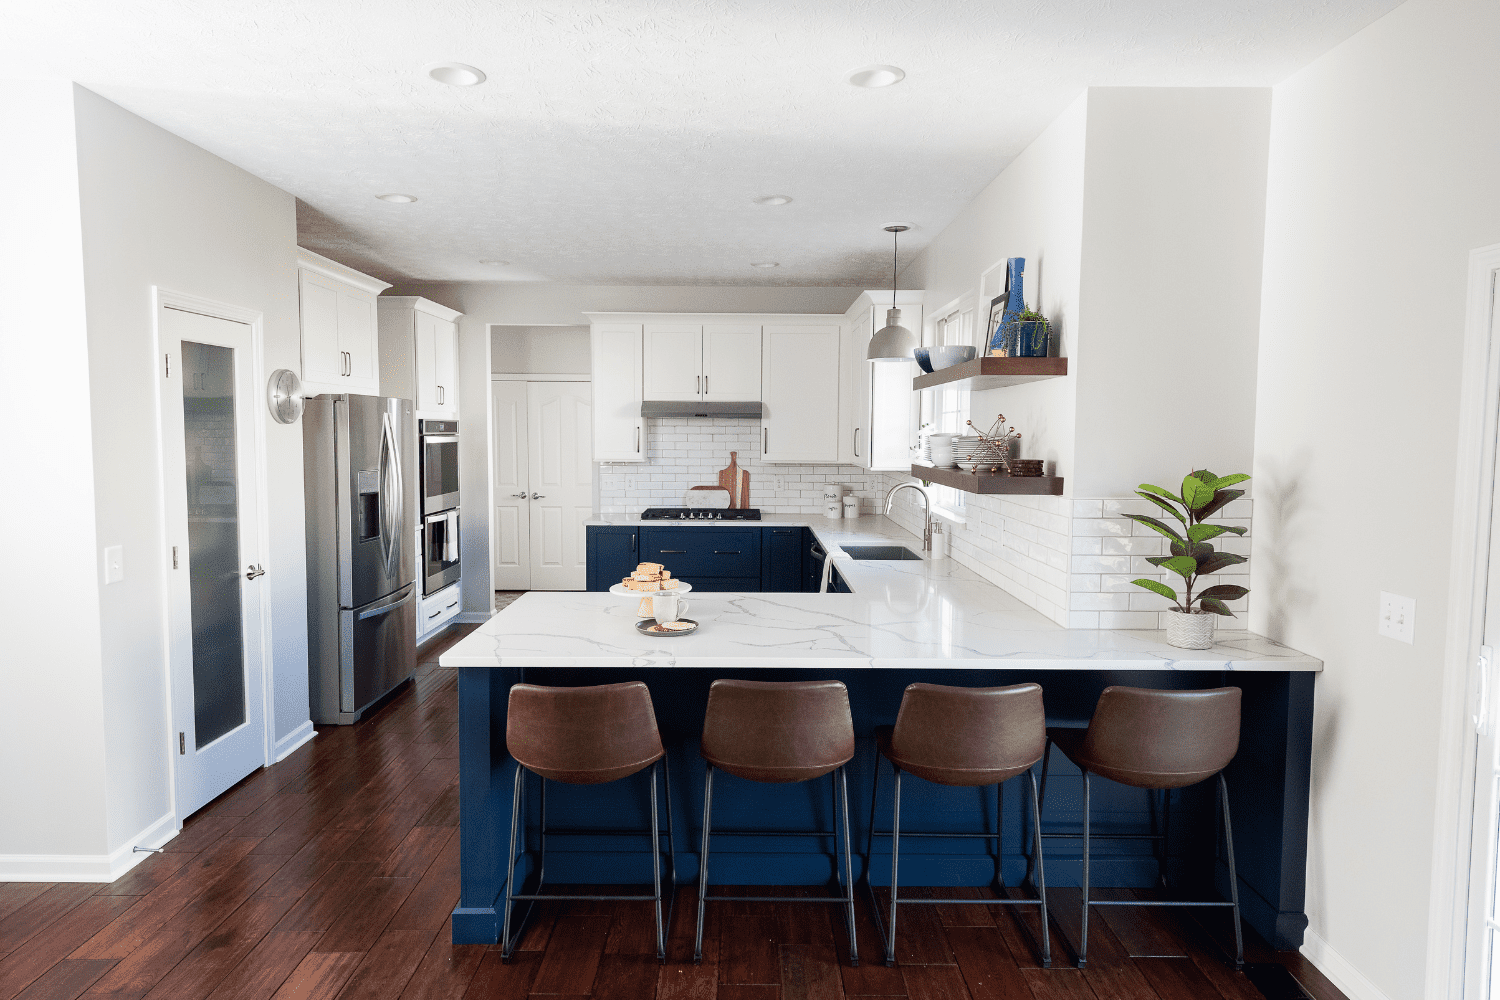 Nicholas Design Build | A kitchen with a blue island and bar stools.